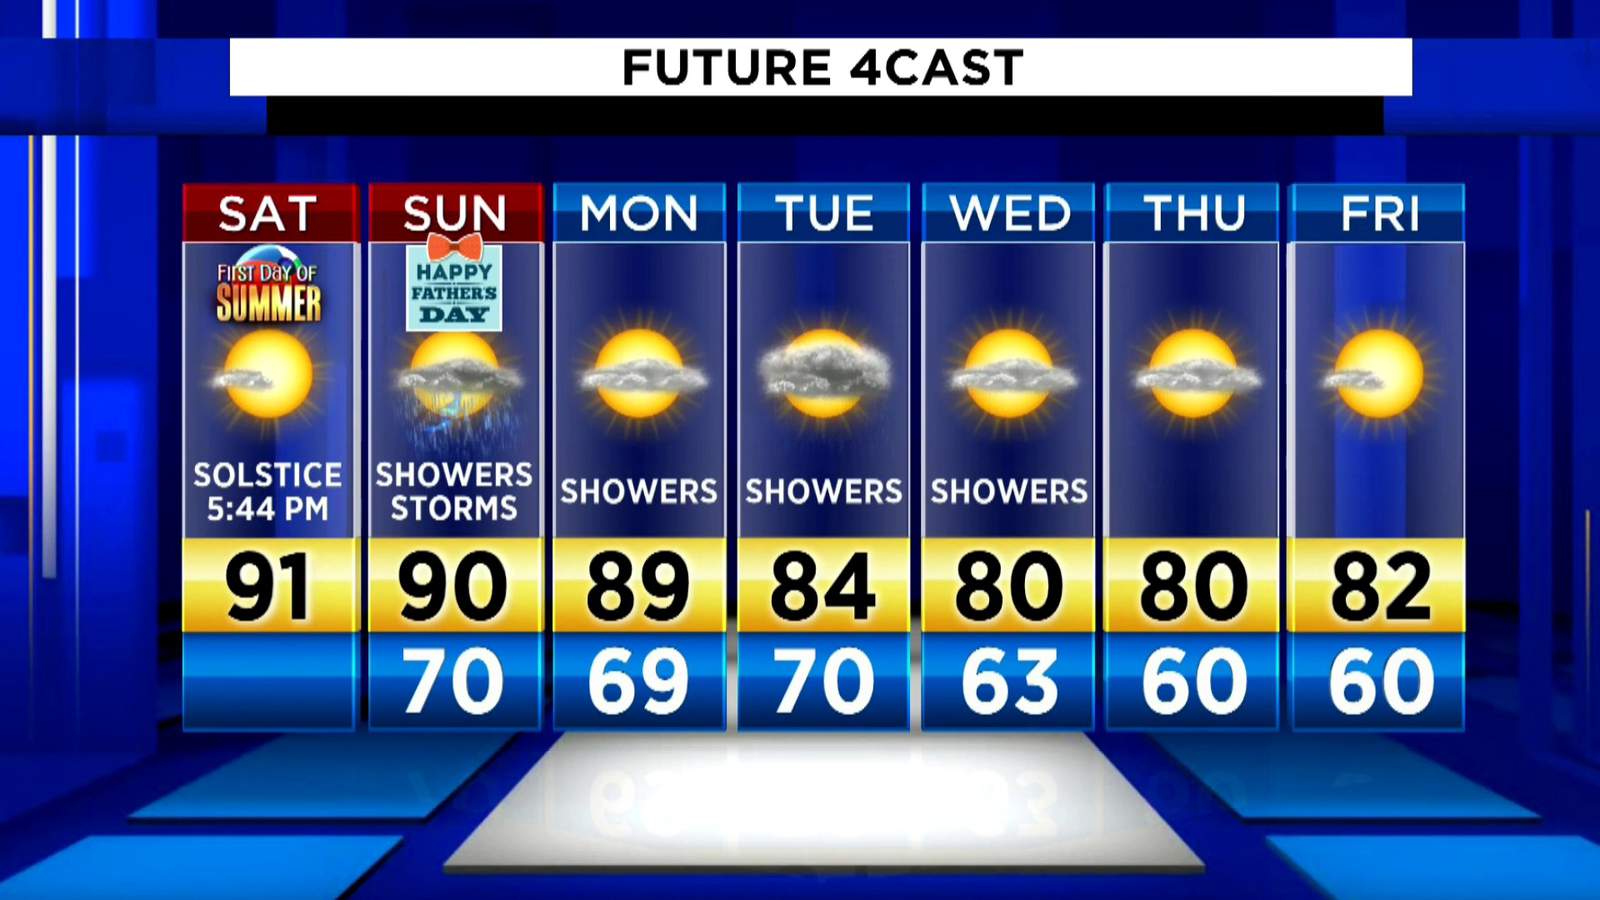 Metro Detroit weather: Summer begins with a warm Saturday evening